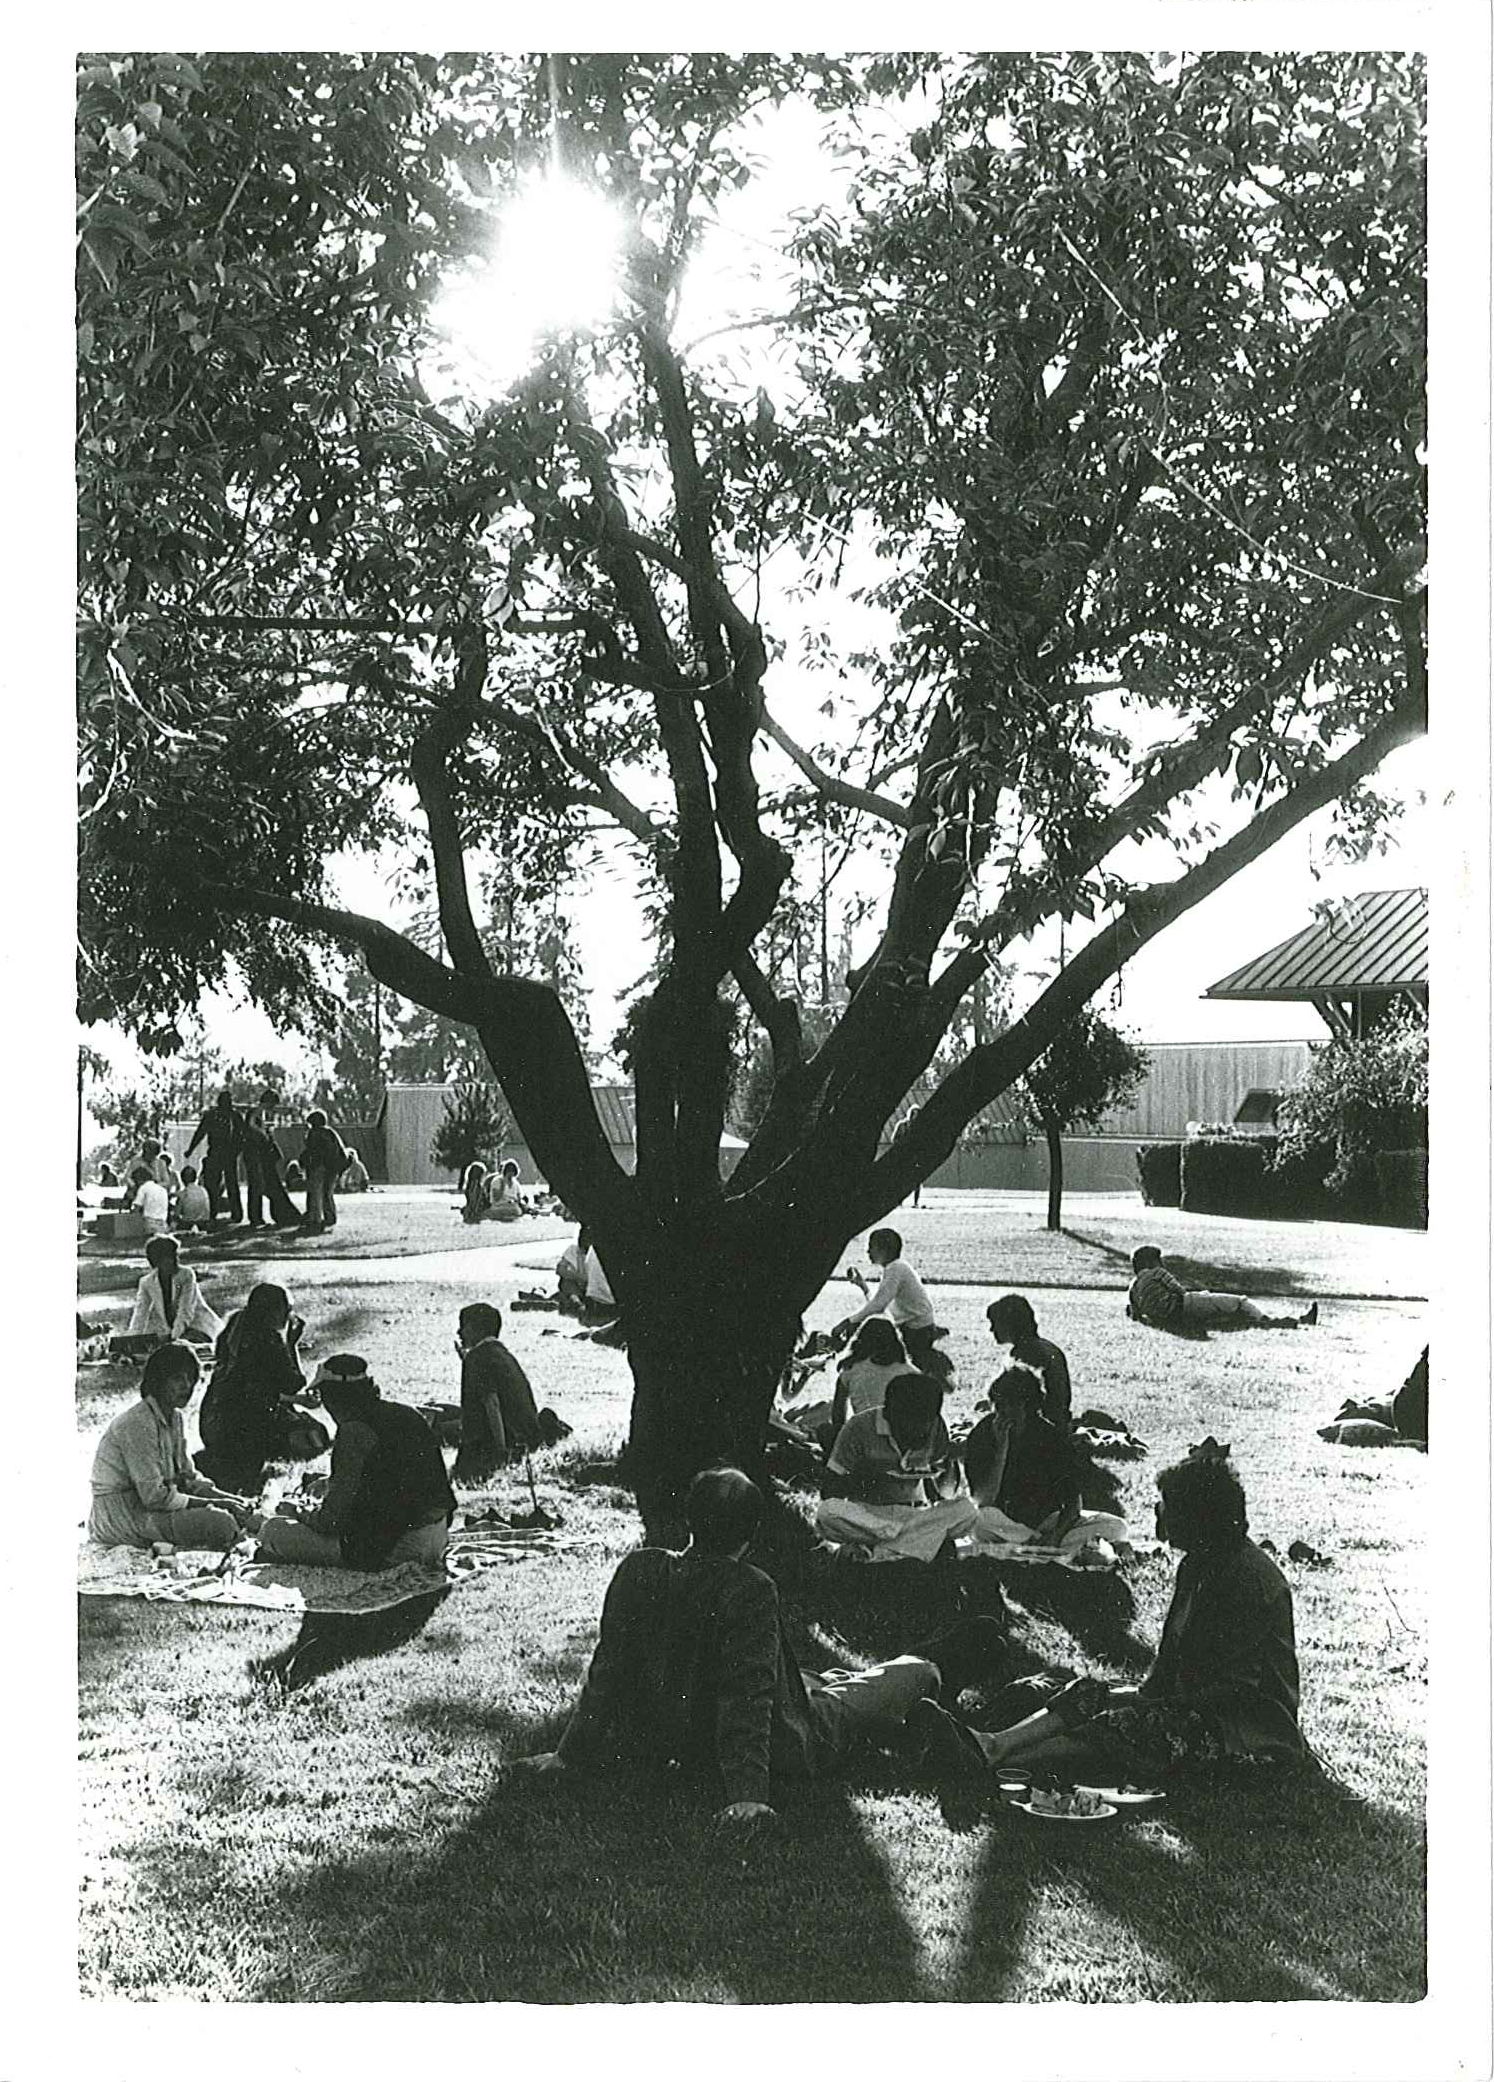 People sitting on a lawn next to a tree